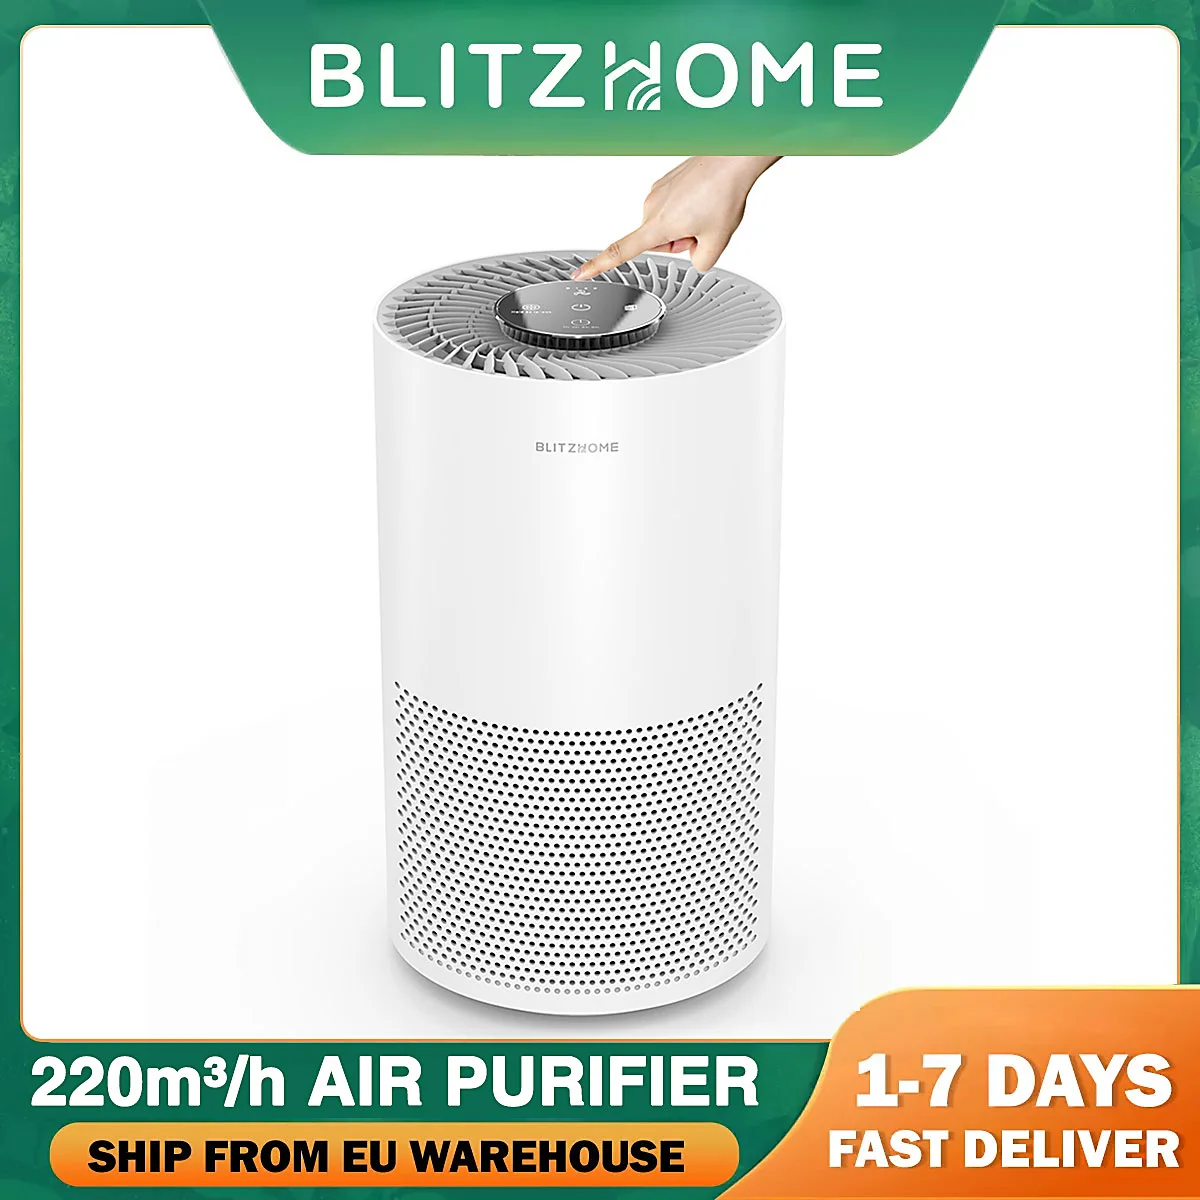 BlitzHome BH-AP1C Air Purifier For Home Protable True H11 HEPA & PP Pre Filter Efficient Purifying Remove Smoke Odor Air Cleaner